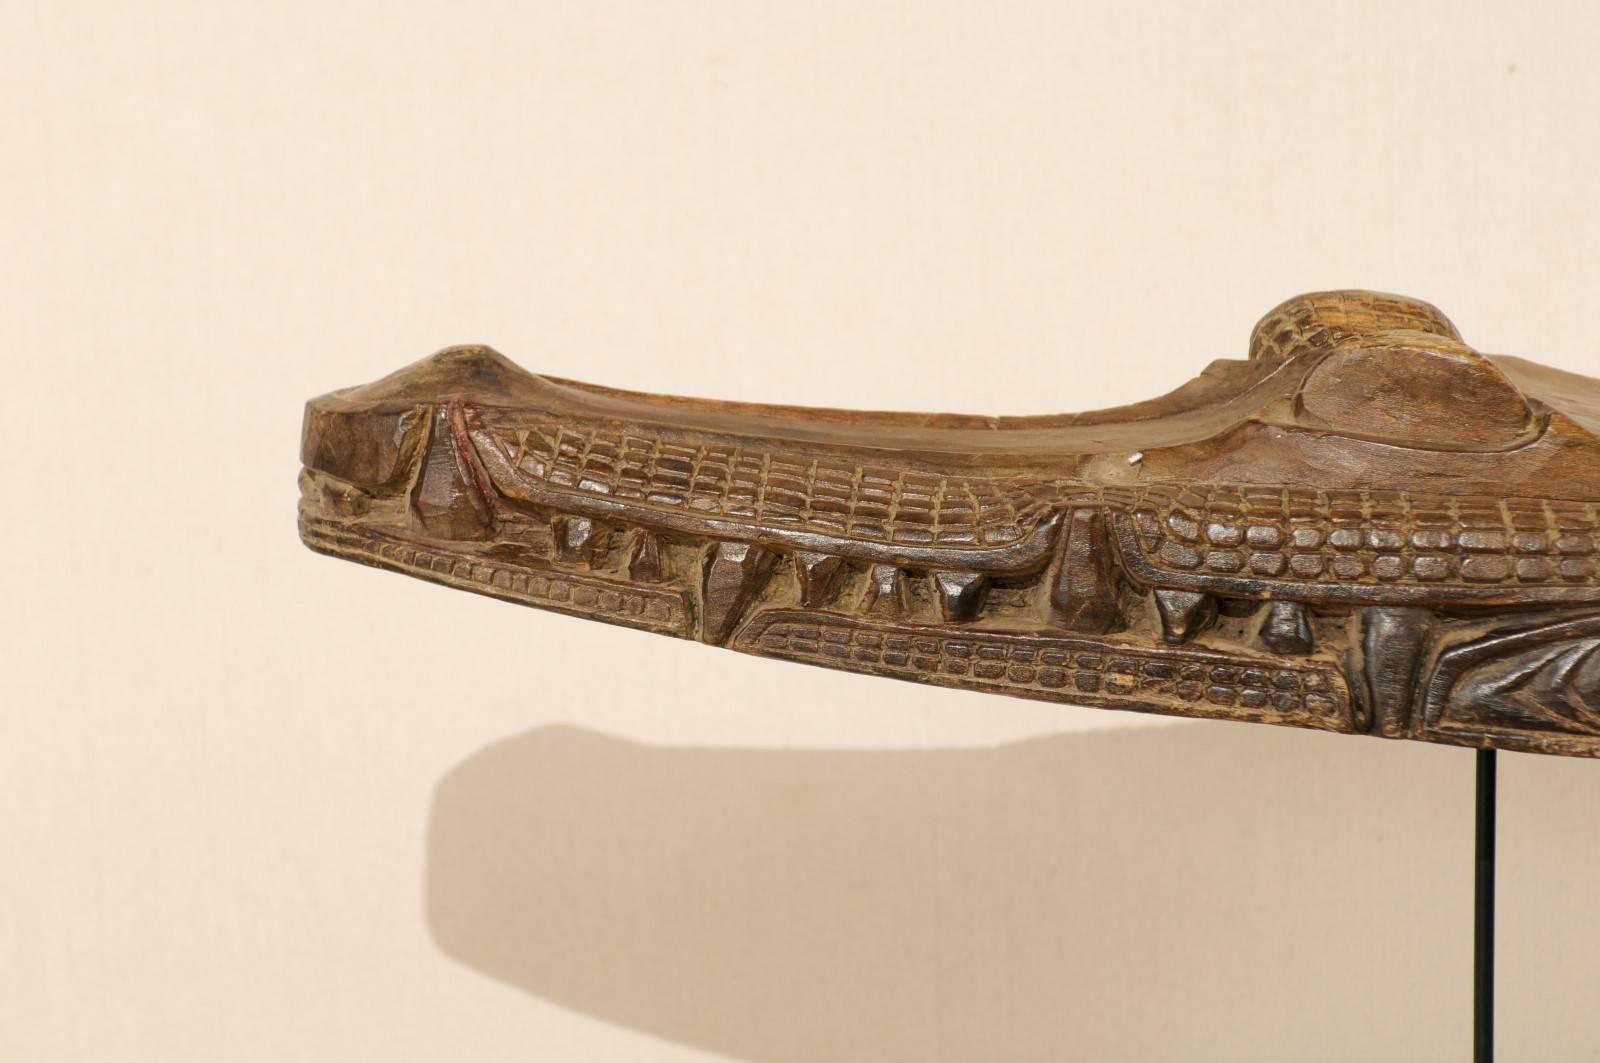 Tribal Hand Carved Crocodile Wood Boat Prow from a Papua New Guinea Village Canoe